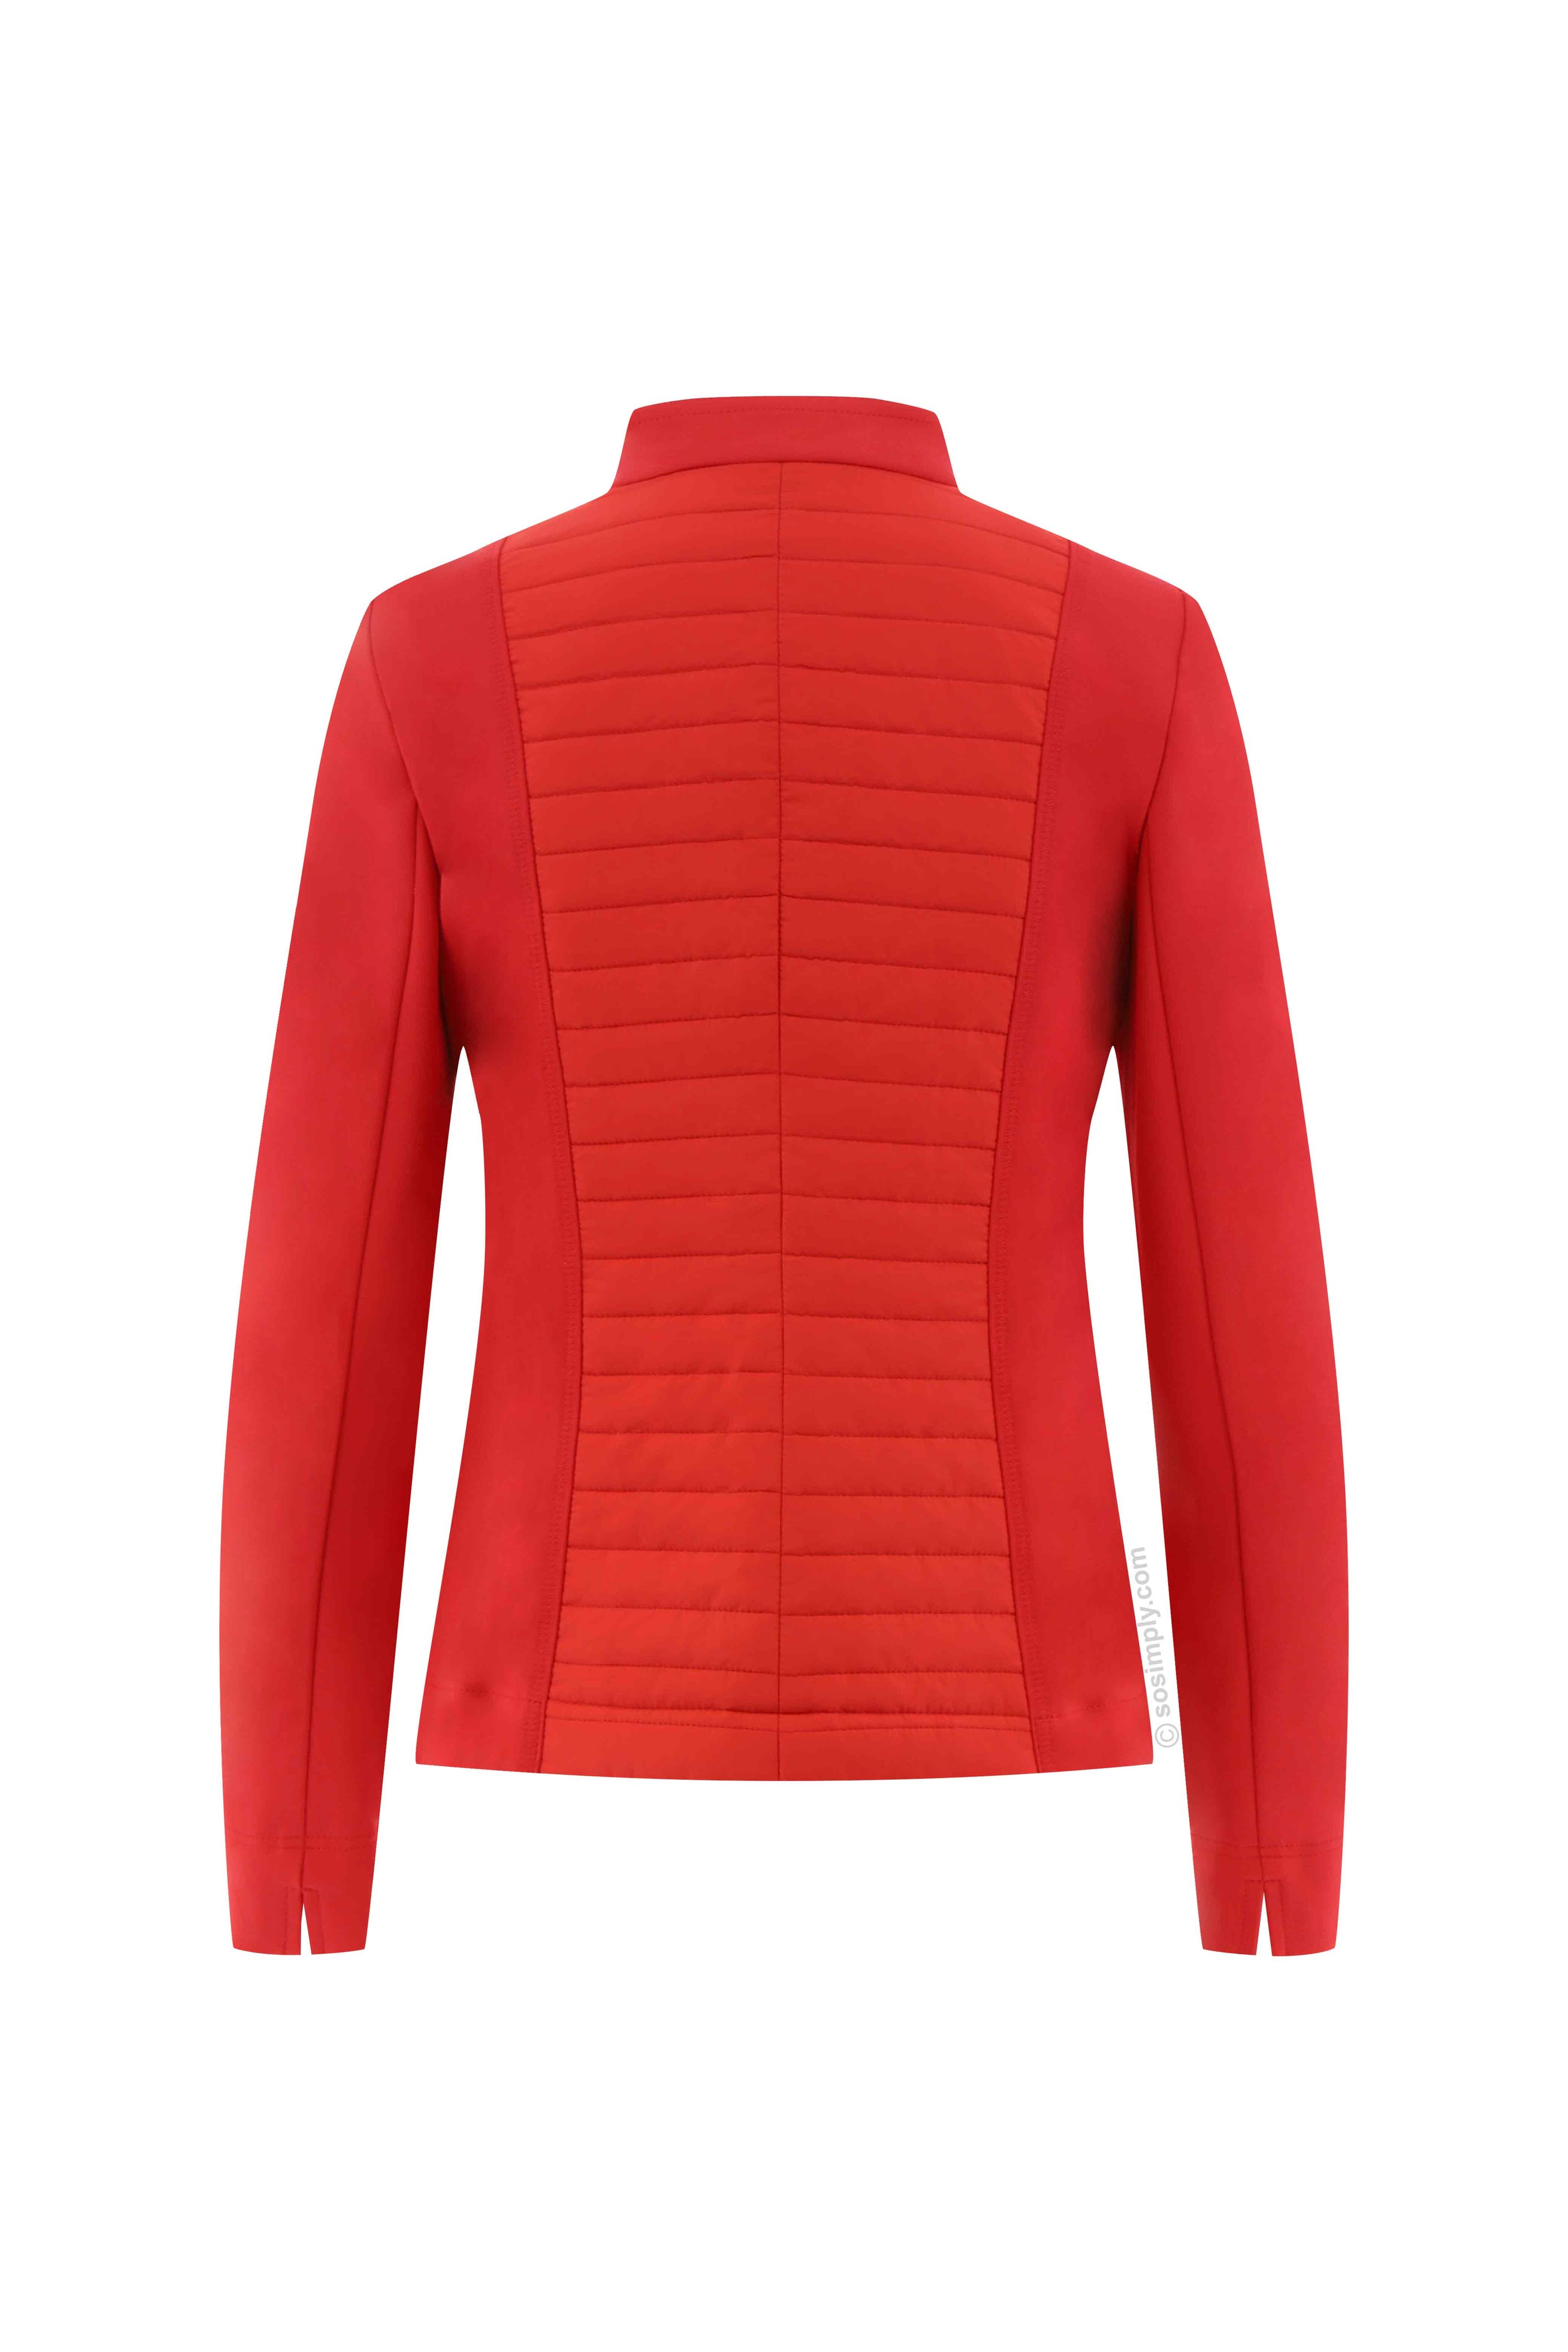 Icona Hybrid Quilted Jacket - So Simply